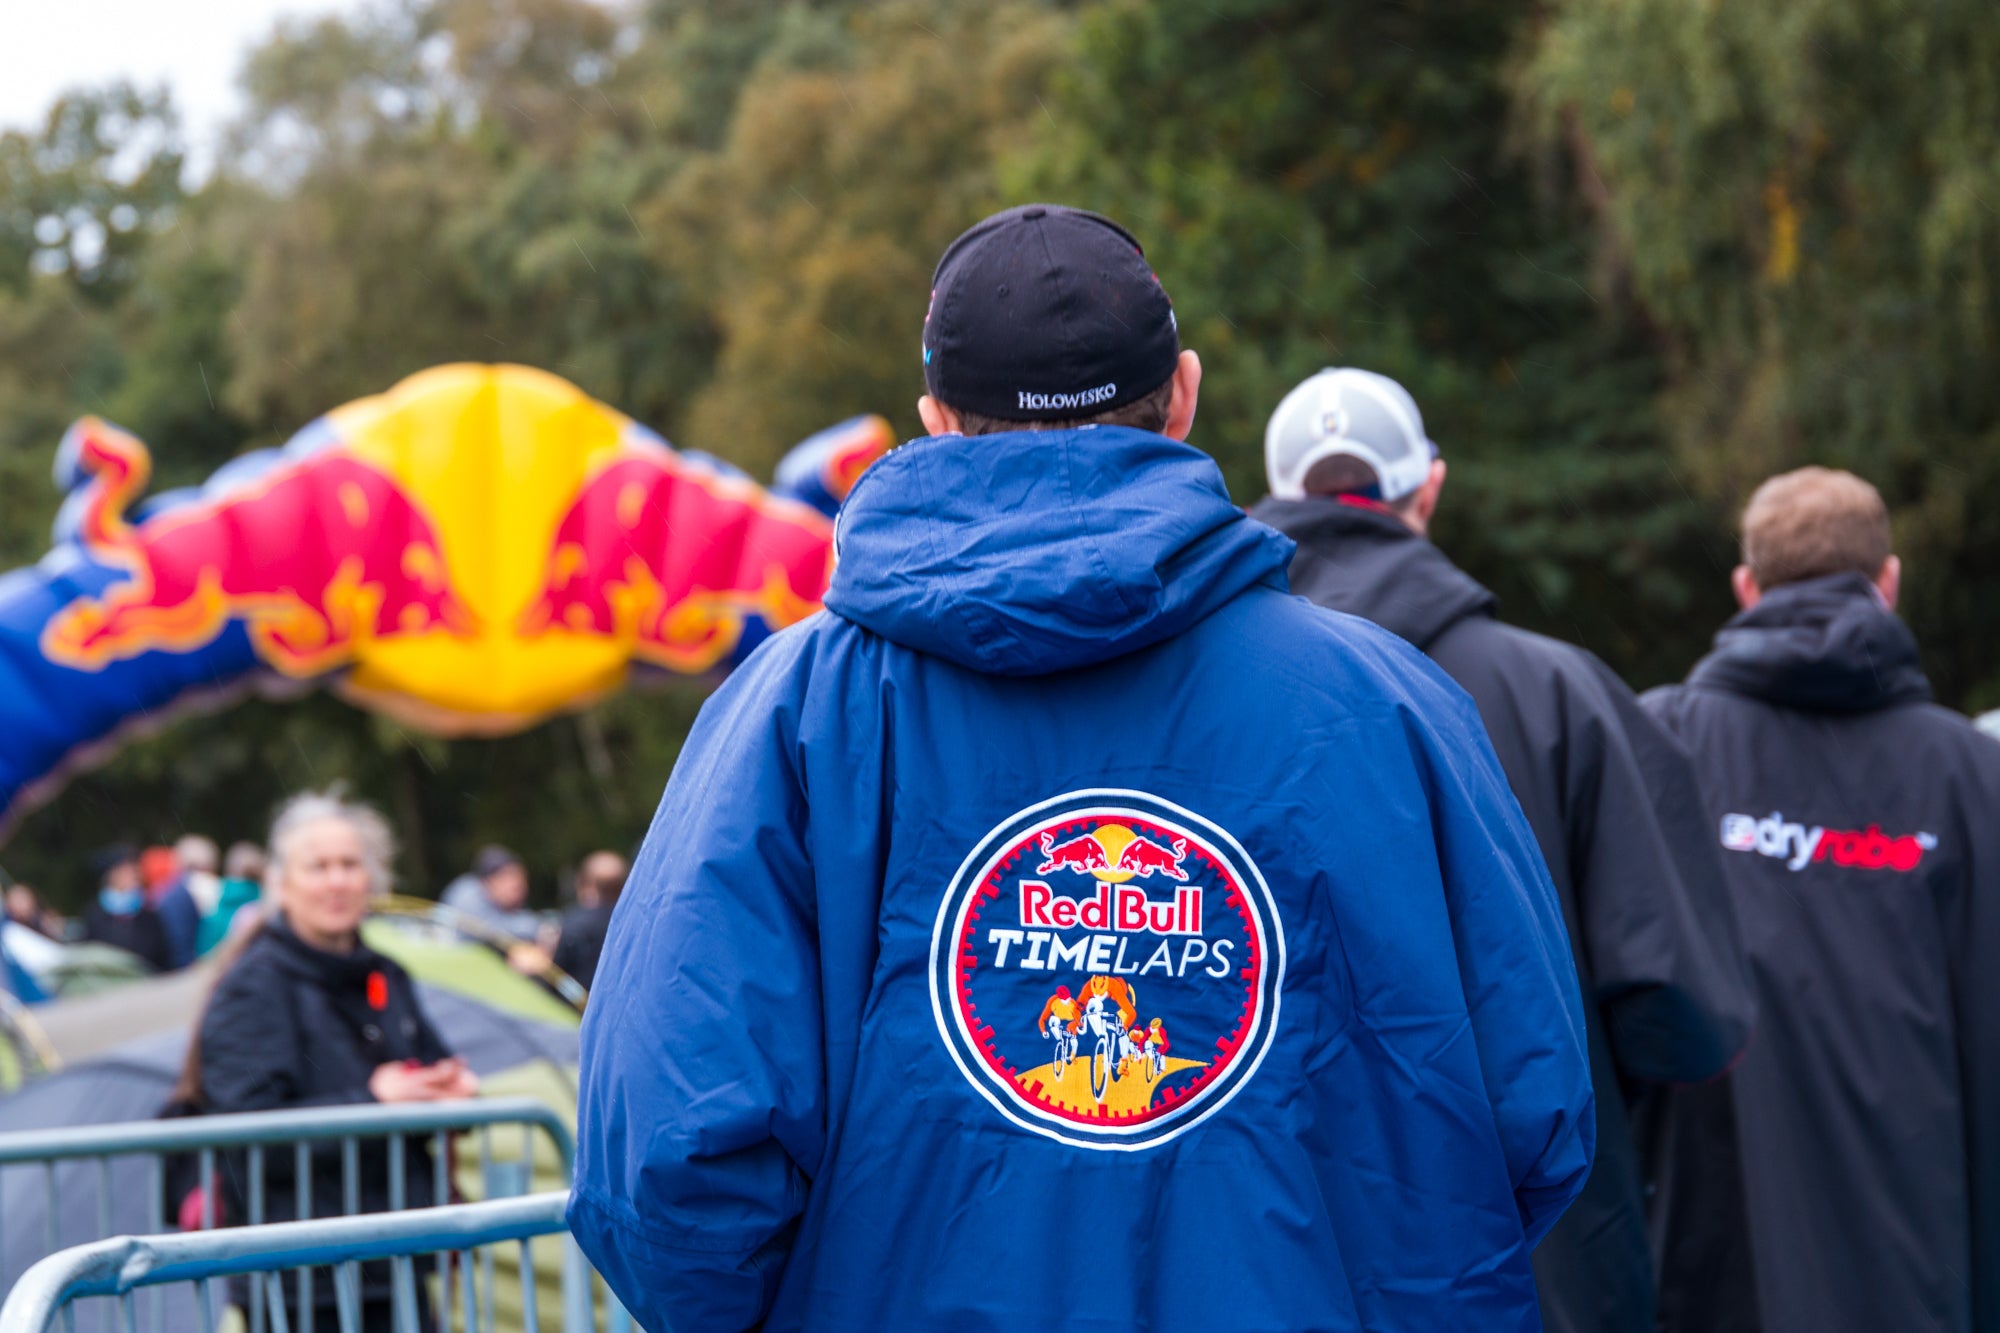 Red Bull Timelaps Limited Edition dryrobe